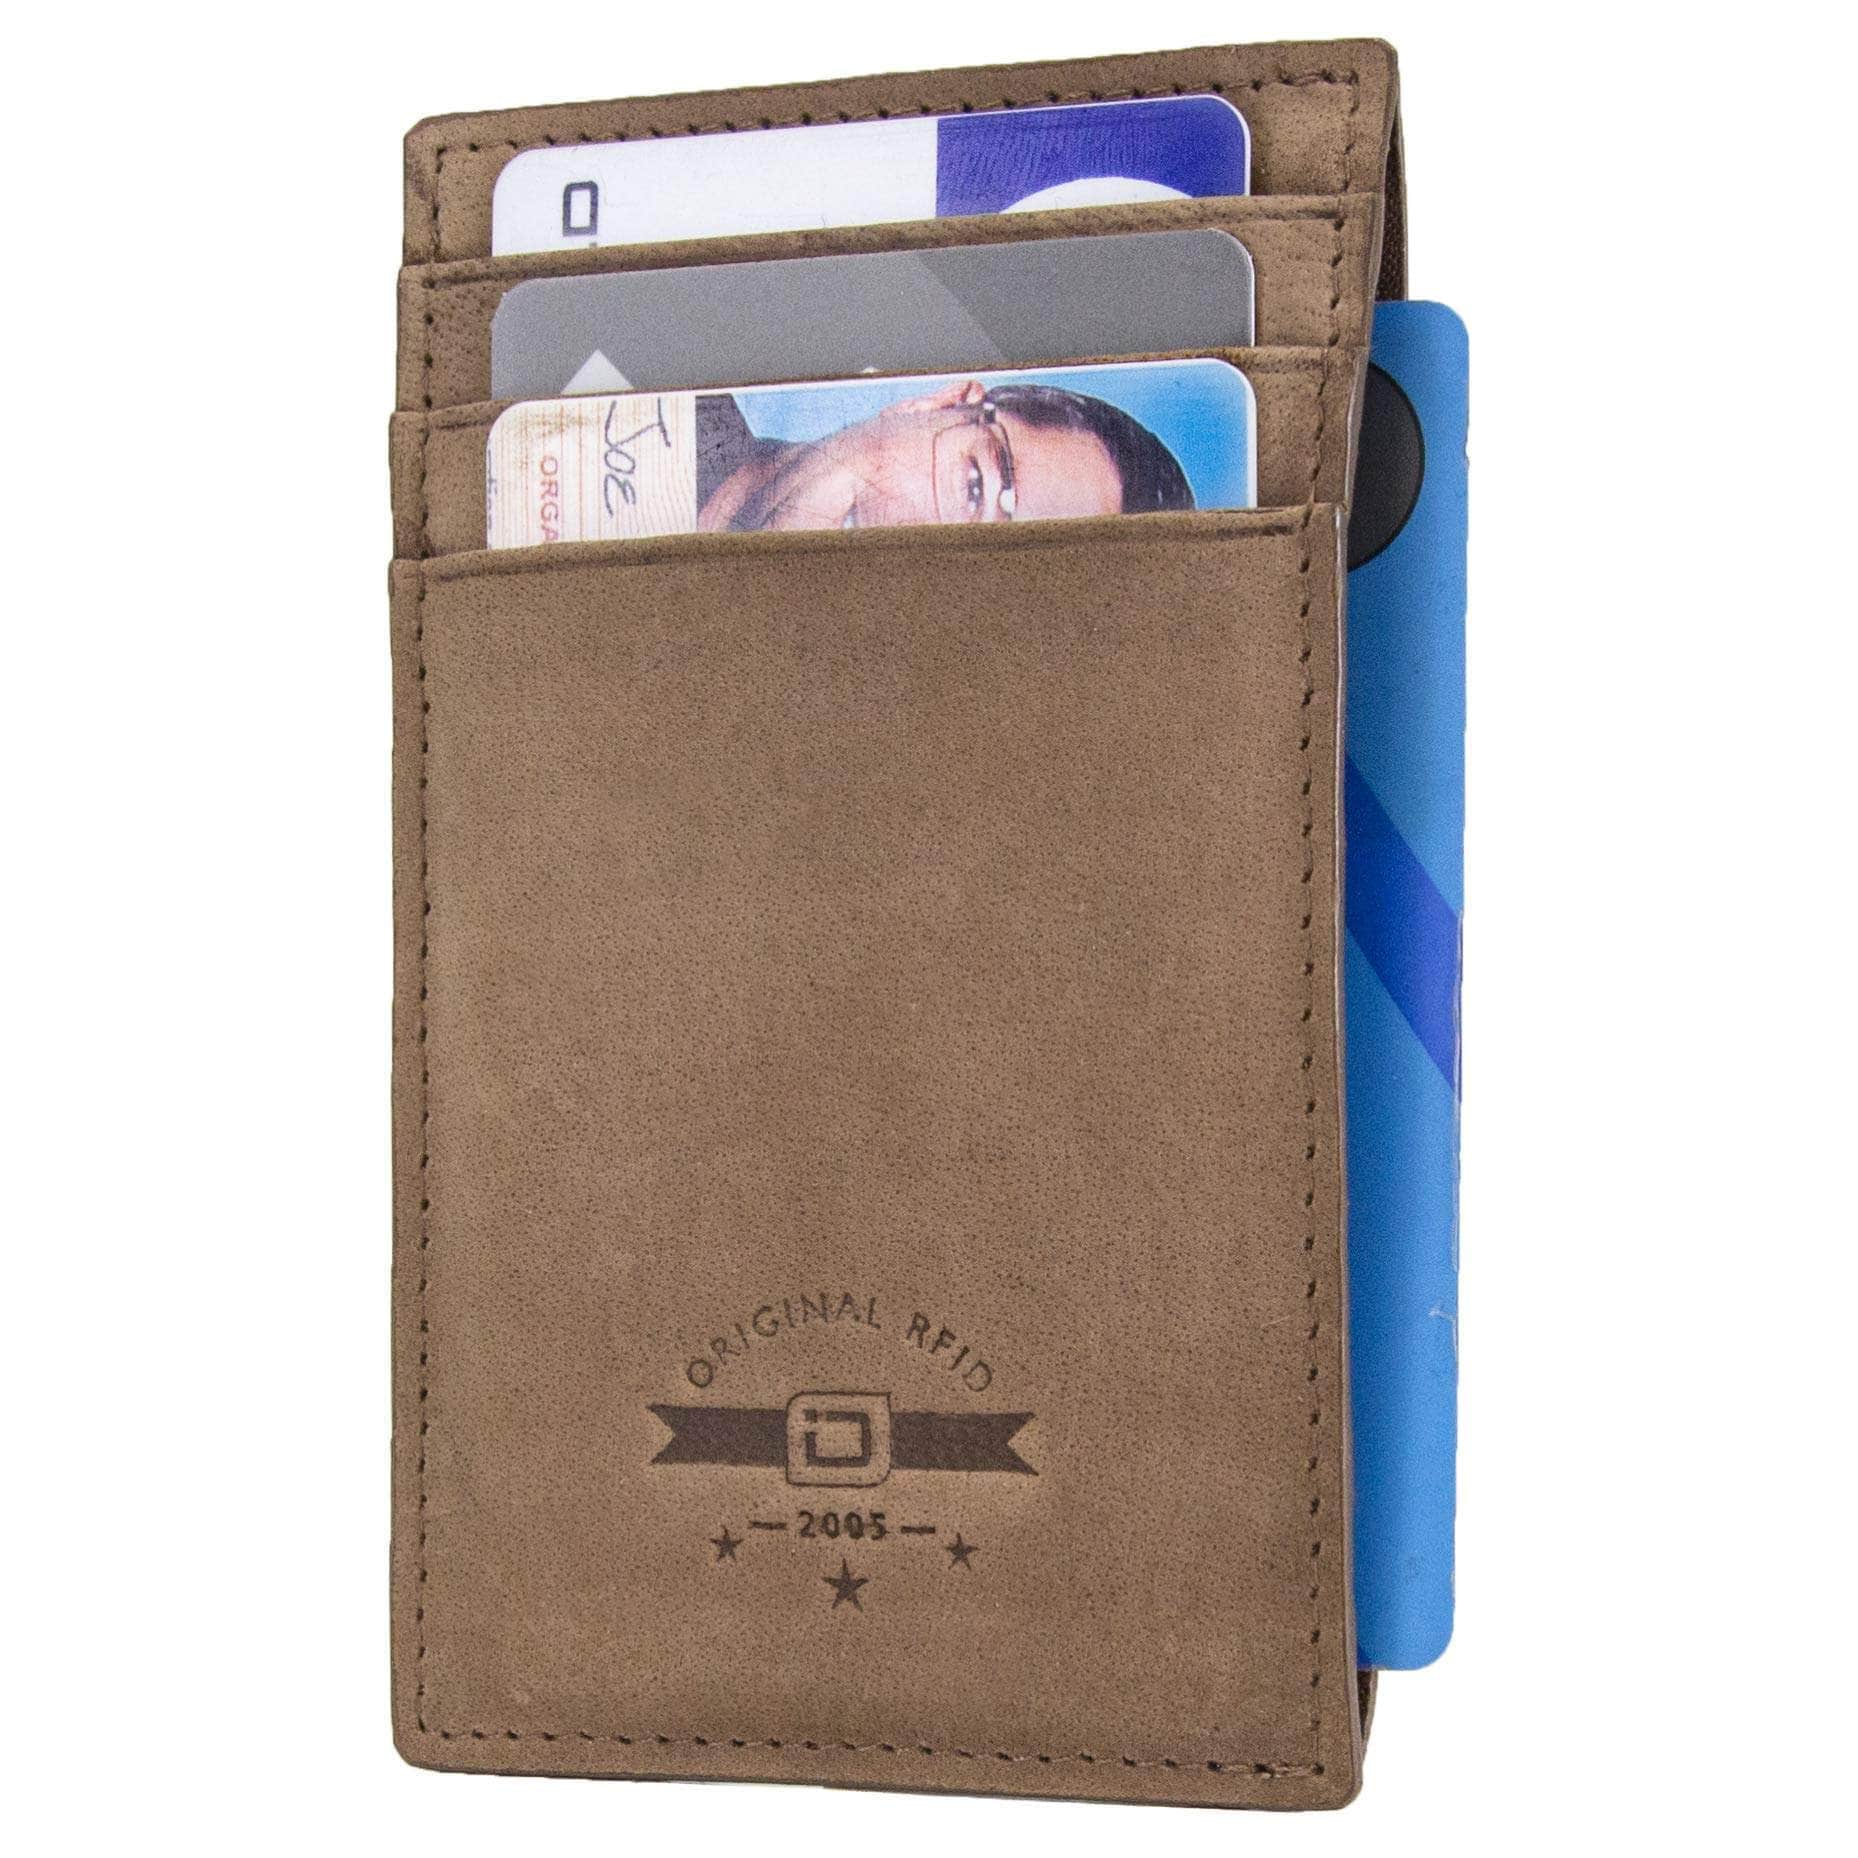 ID Stronghold Men's Mini Wallet Clip Mens RFID Wallet Money Clip with Bottle Opener